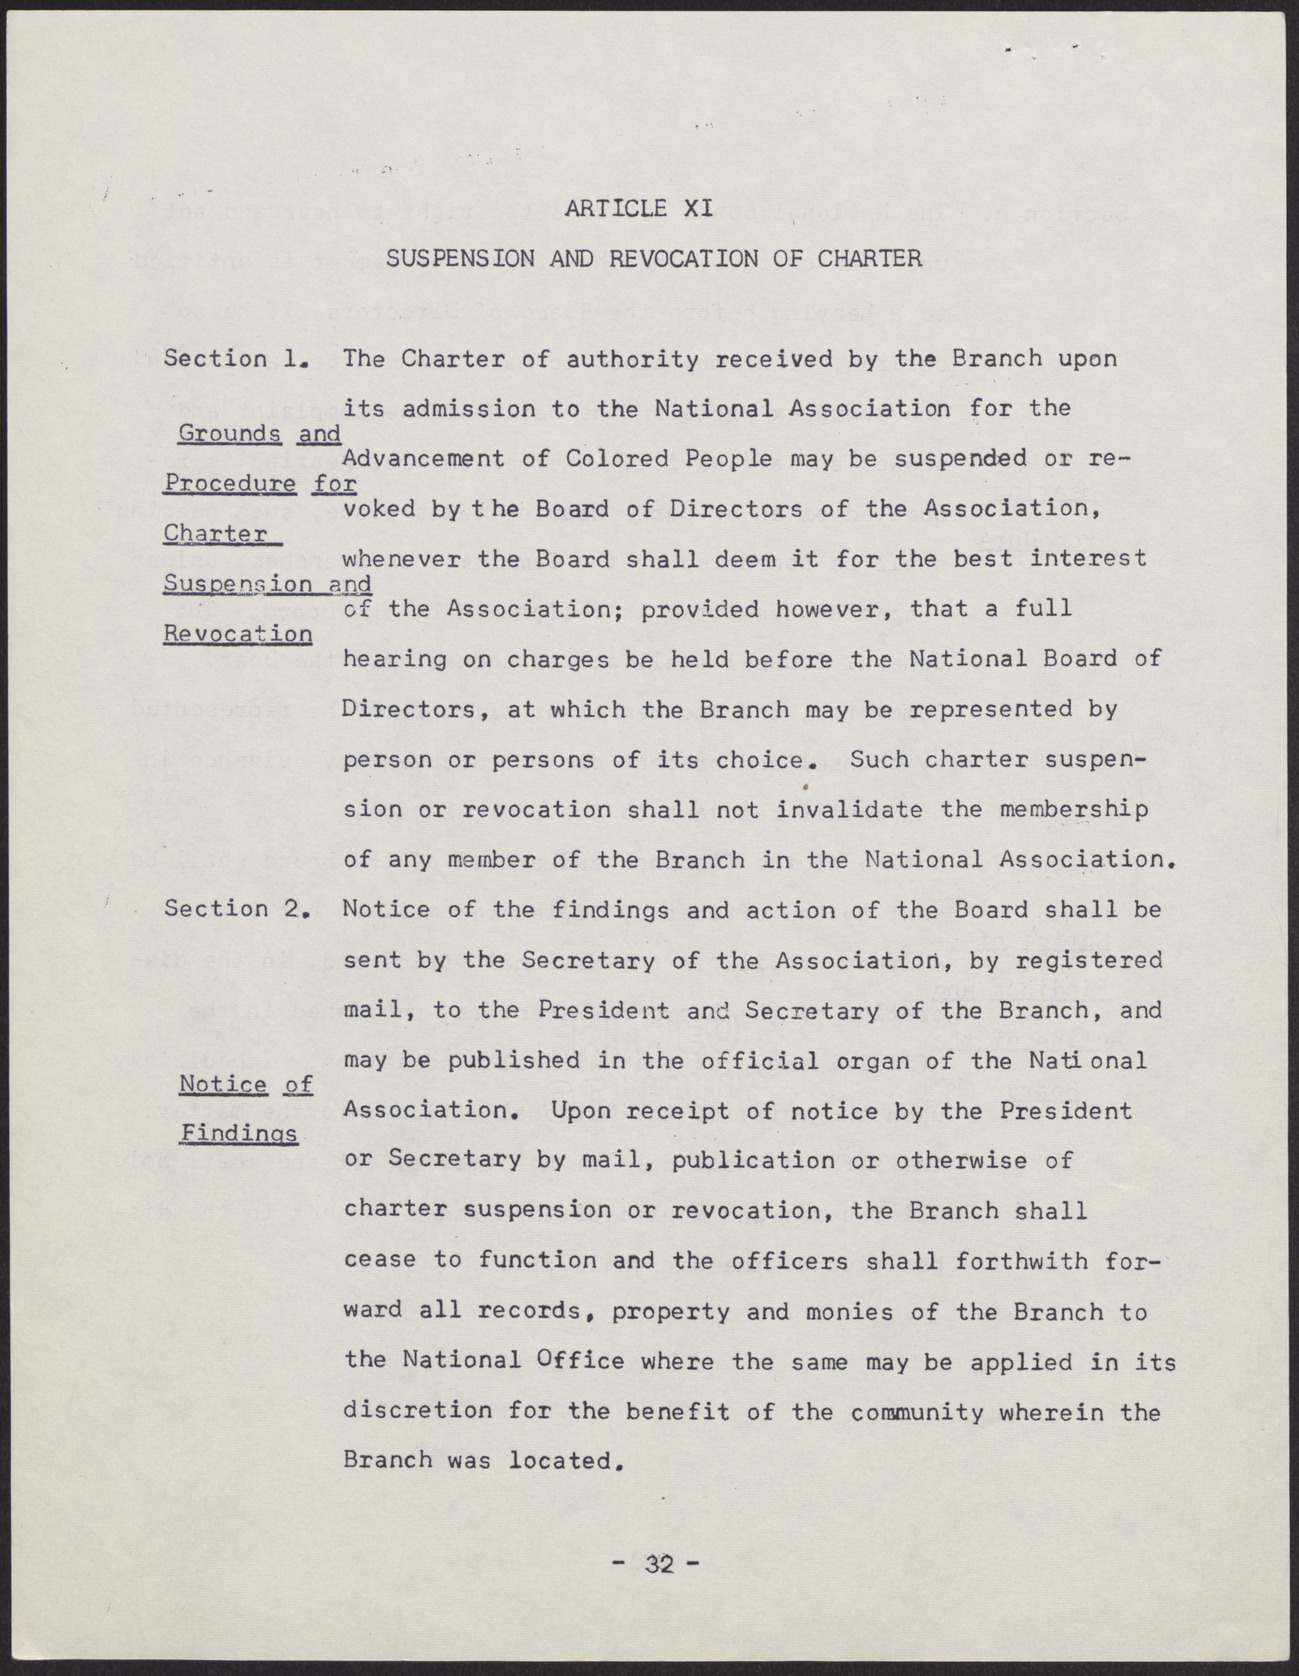 Amended Constitution and By-laws for branches of the NAACP (36 pages), no date, page 32